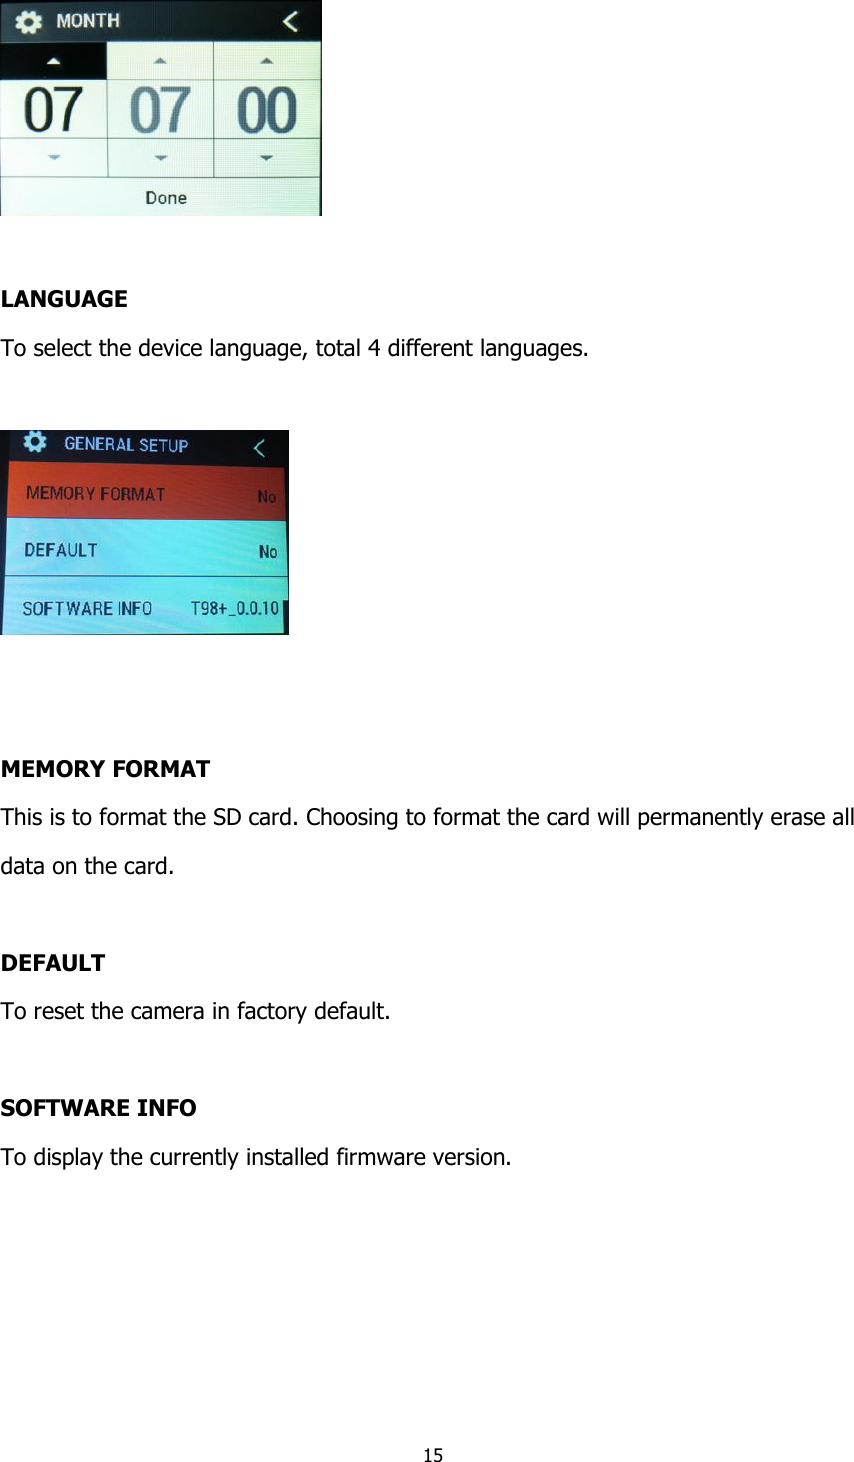 15    LANGUAGE To select the device language, total 4 different languages.     MEMORY FORMAT This is to format the SD card. Choosing to format the card will permanently erase all  data on the card.  DEFAULT To reset the camera in factory default.  SOFTWARE INFO To display the currently installed firmware version.      